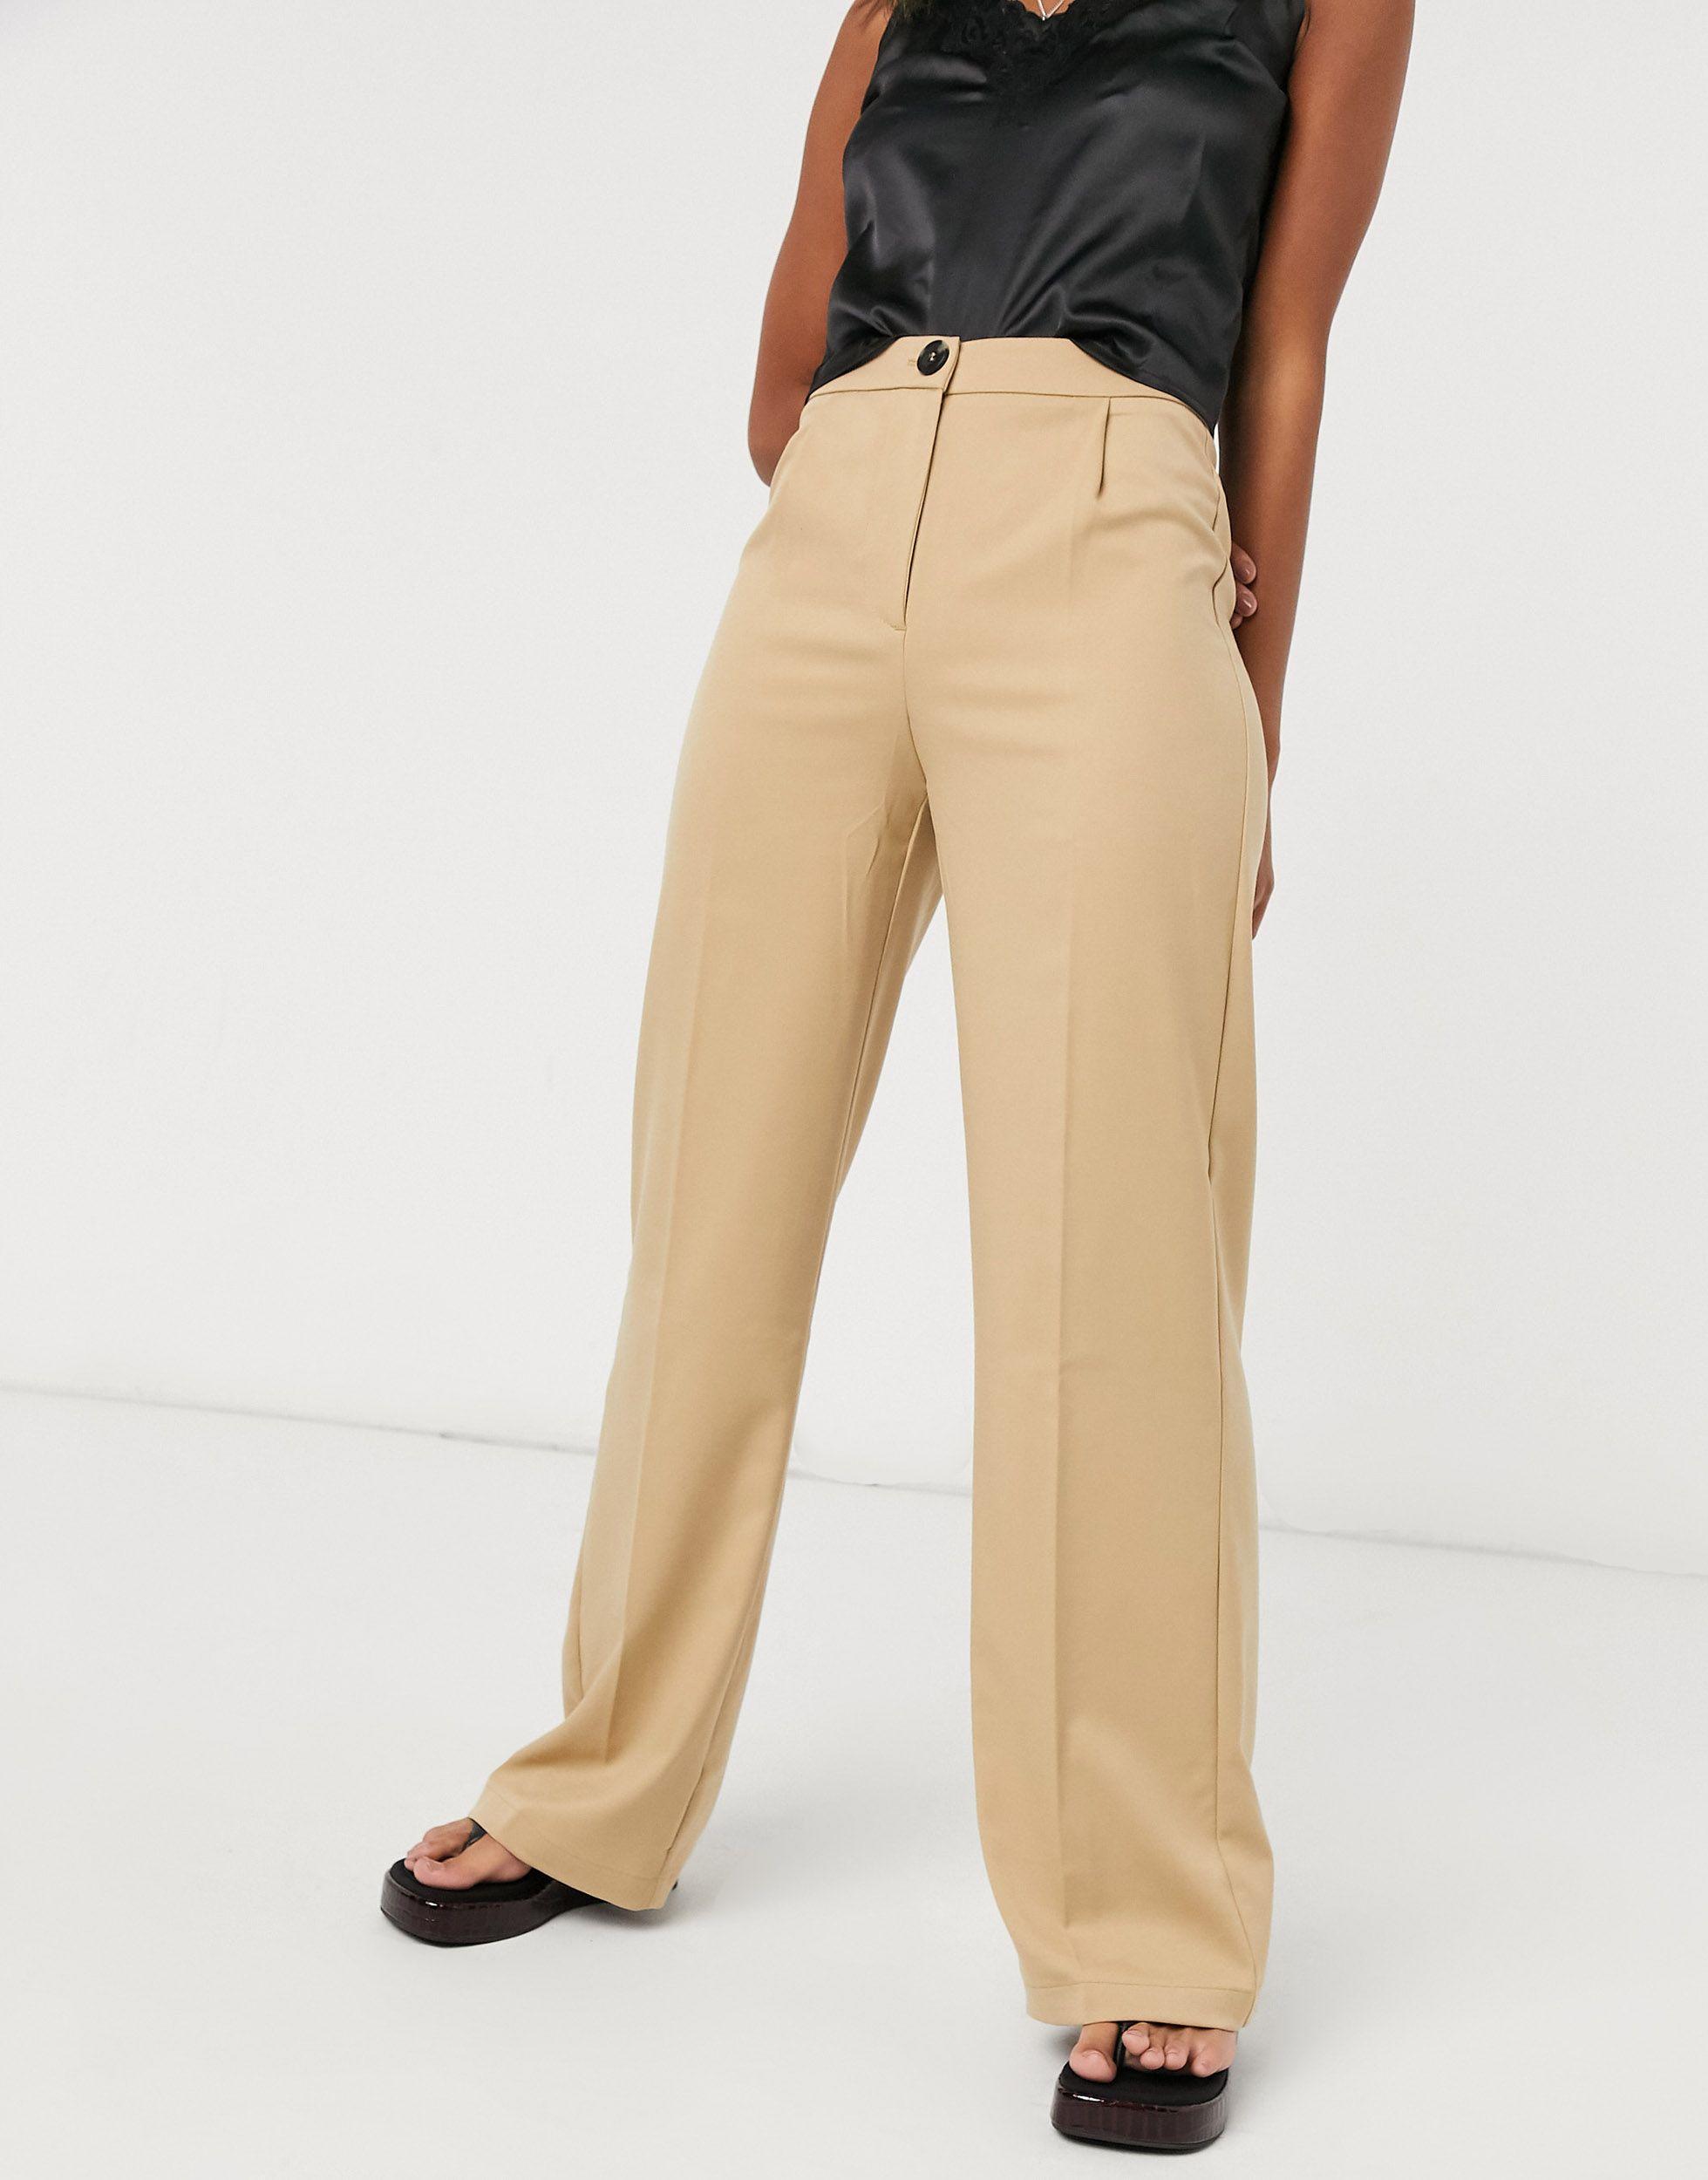 Bershka Wide Leg Relaxed Tailored Pant in Beige (Natural) - Lyst